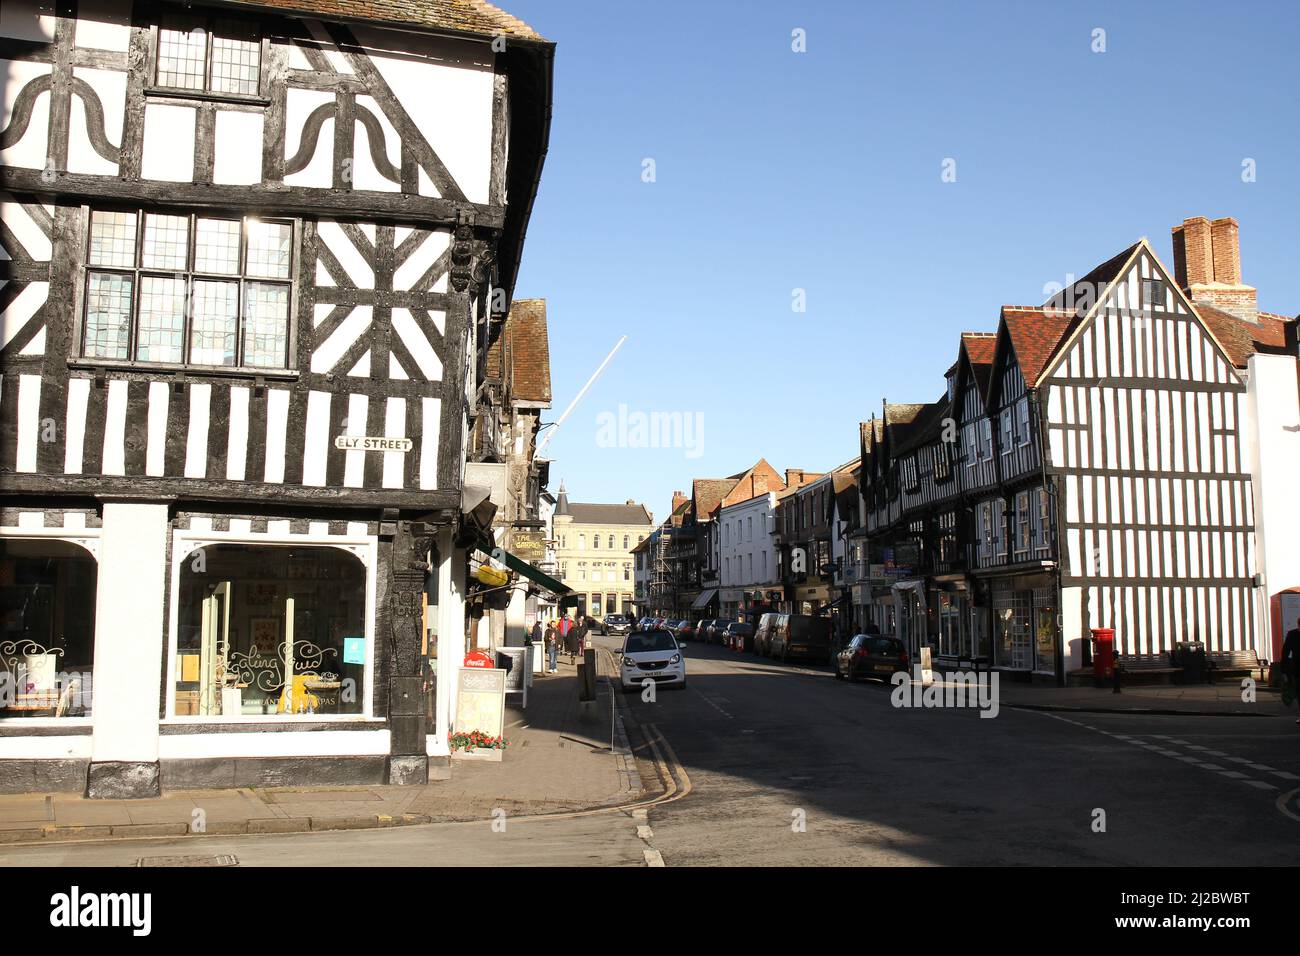 Black and White half timbered Buildings in the High Street, on a blue sky winter's day. Stratford Upon Avon, Warwickshire UK. Stock Photo